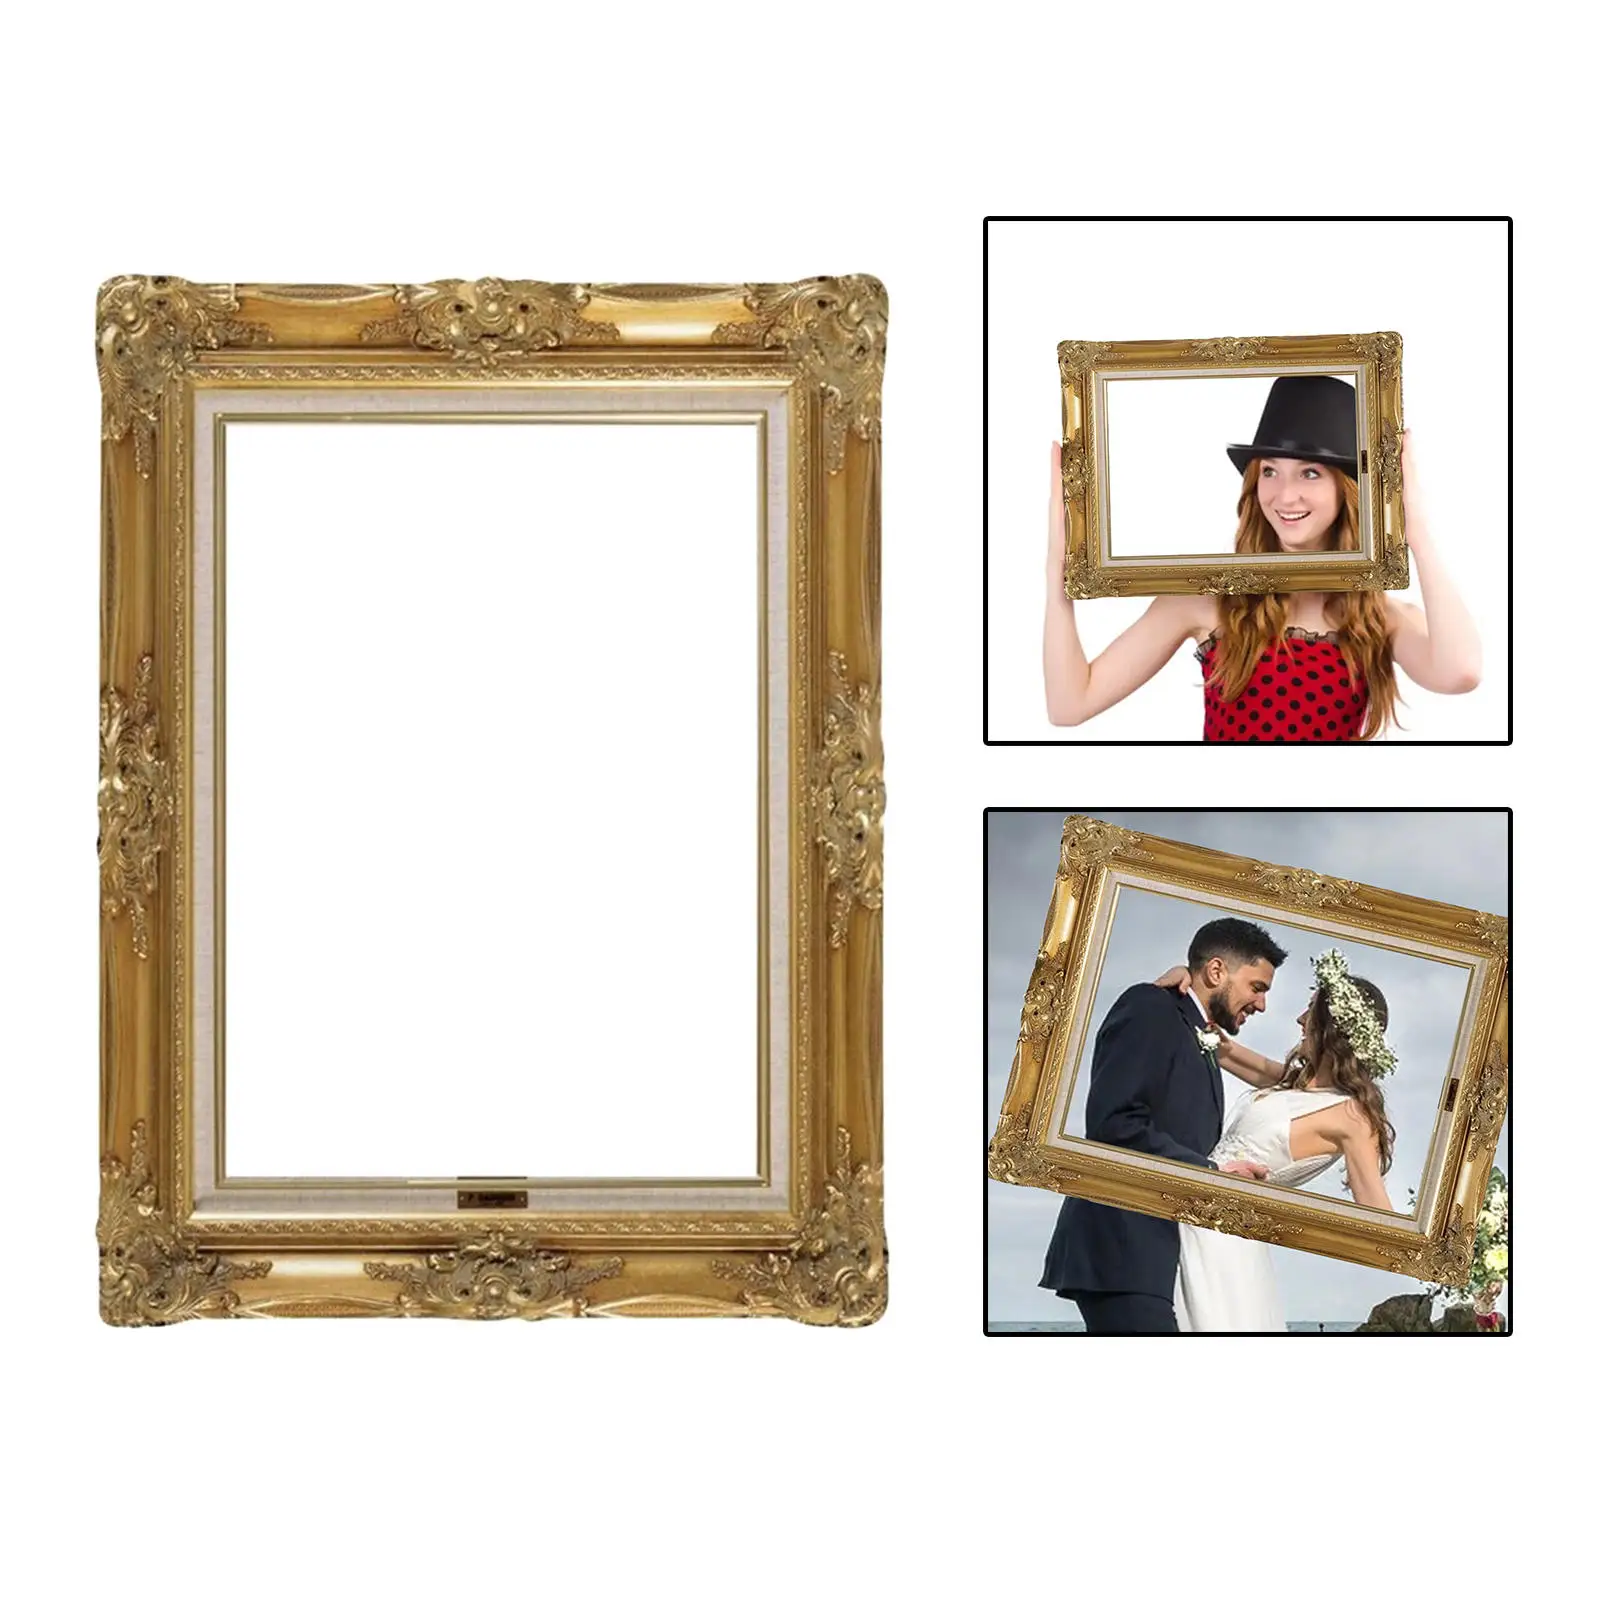 Inflatable Selfie Frame Photo Booth Props Decoration DIY Hand Holdingb Golden Photo Frame for Birthday Friends Xmas Wedding